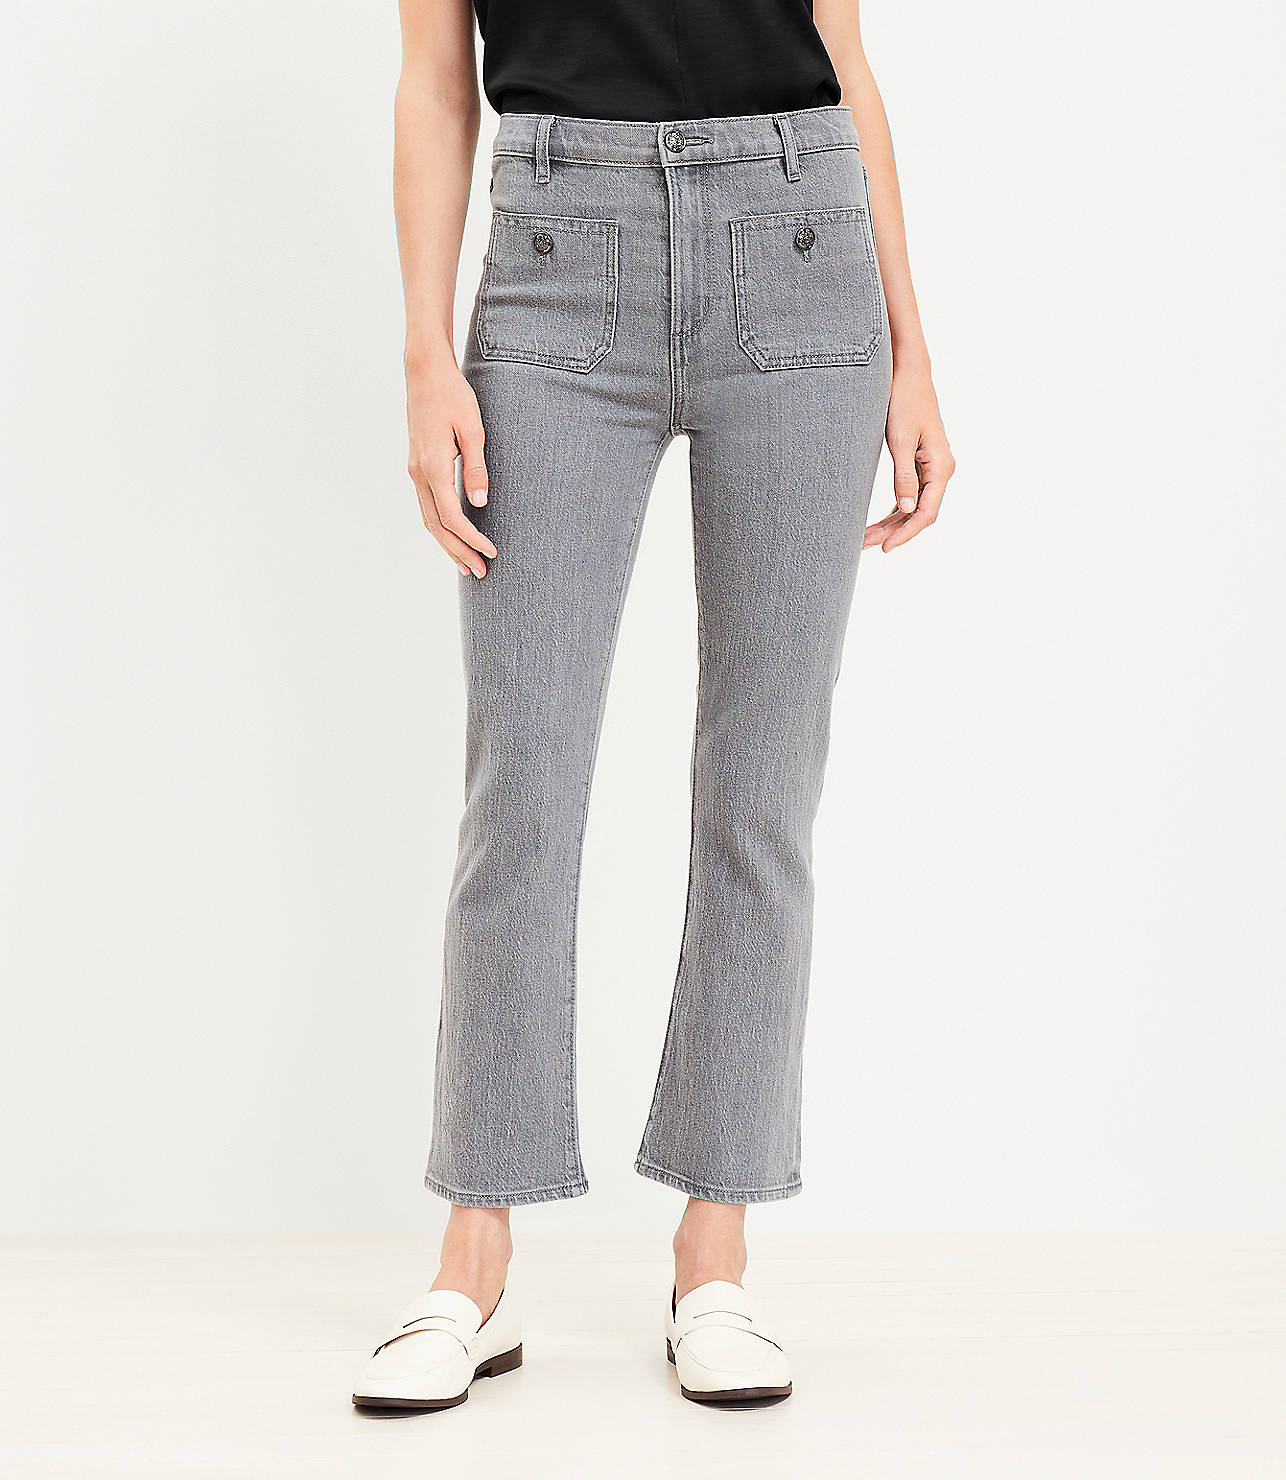 Petite Patch Pocket High Rise Kick Crop Jeans in Grey